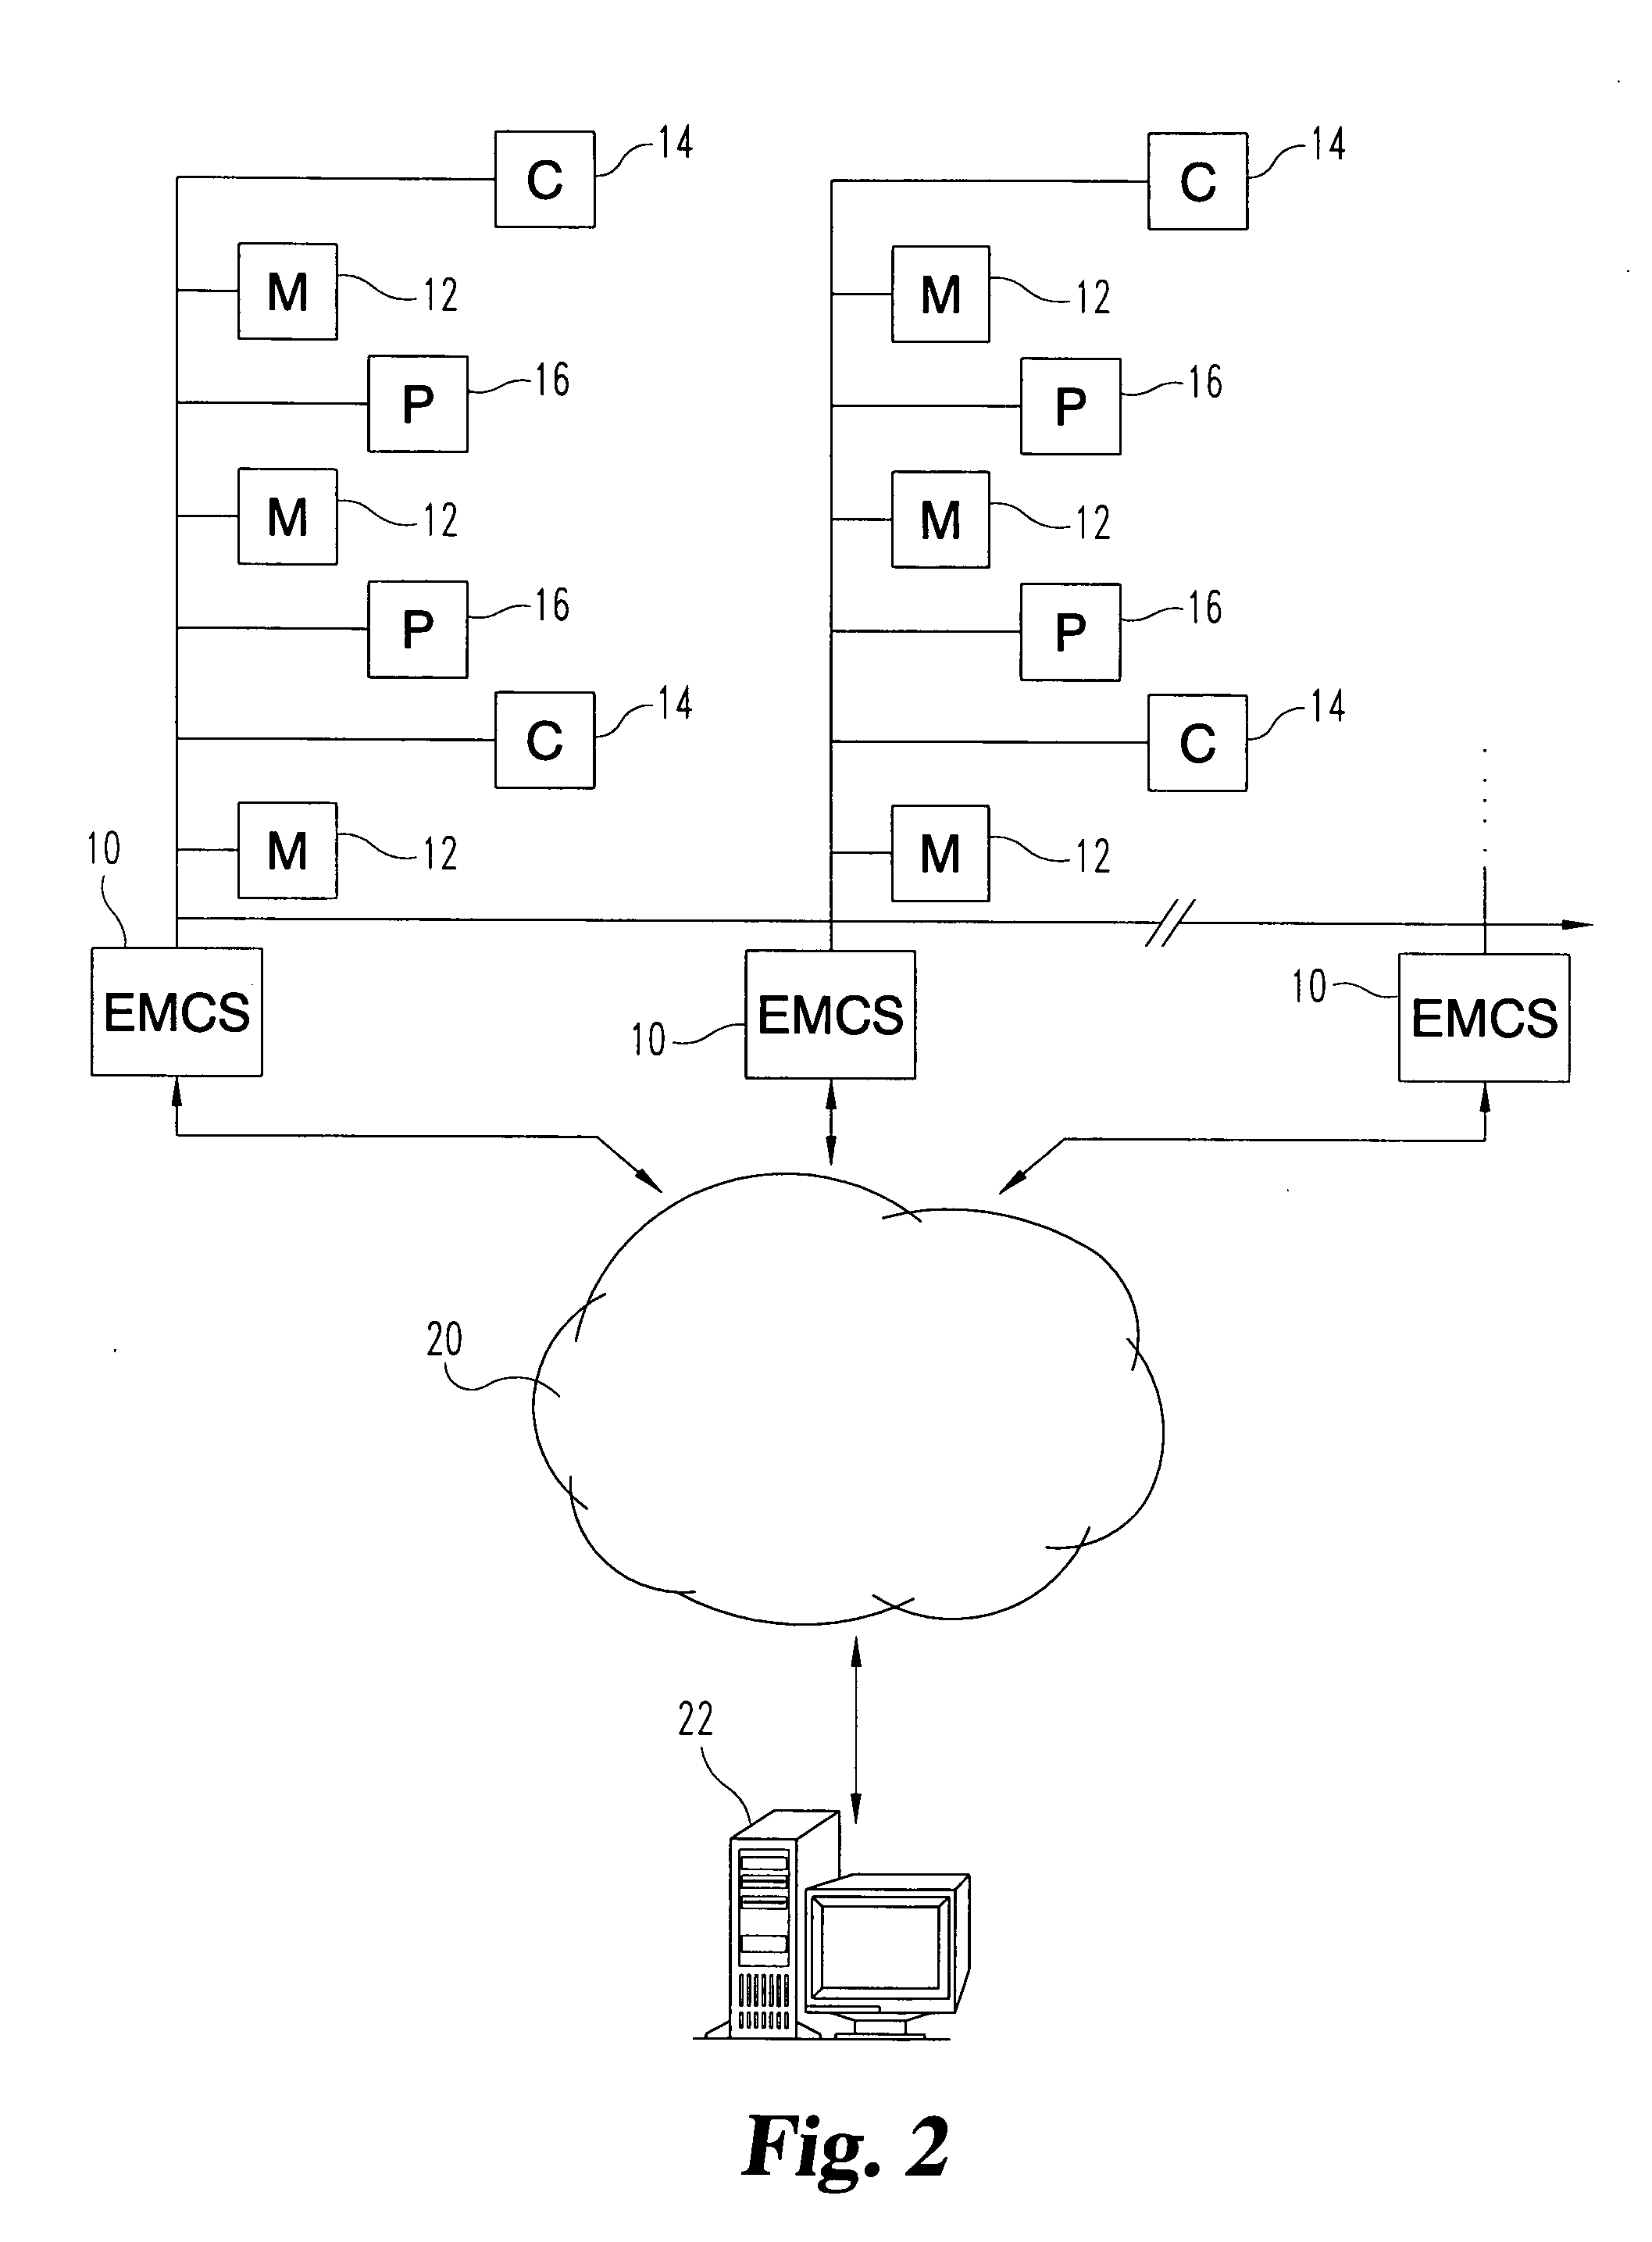 System and method for distributed facility management and operational control